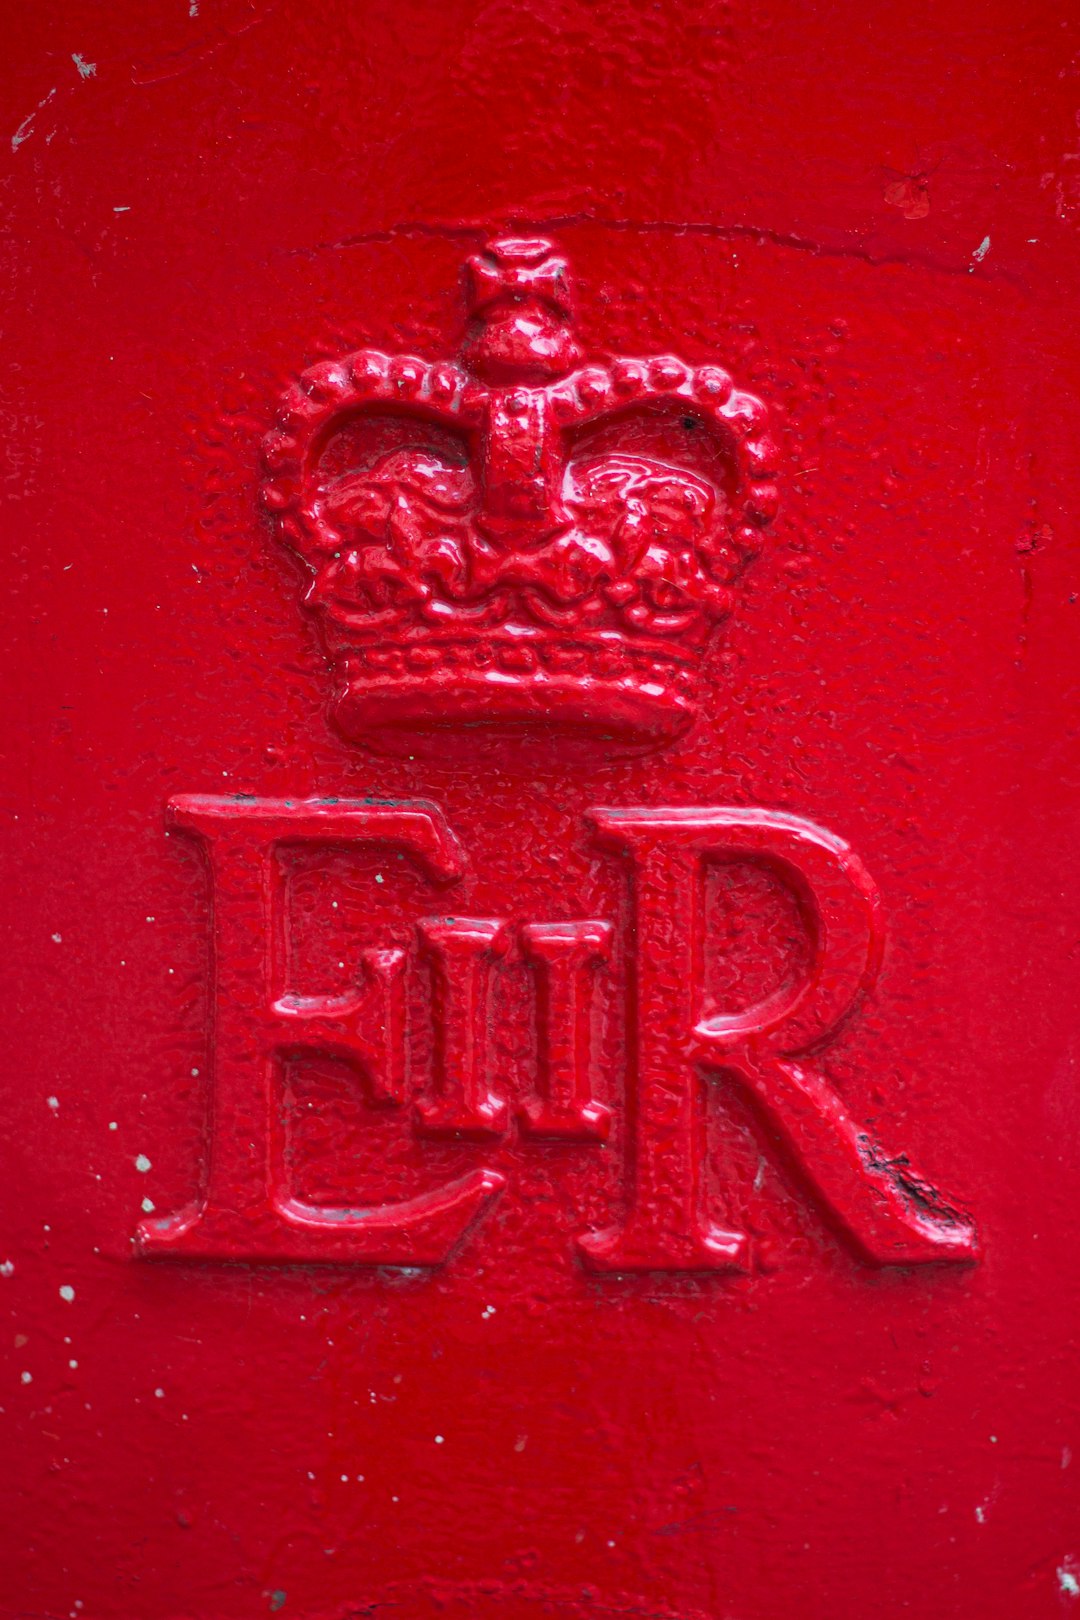 EIIR logo, symbol of the queen and royalty